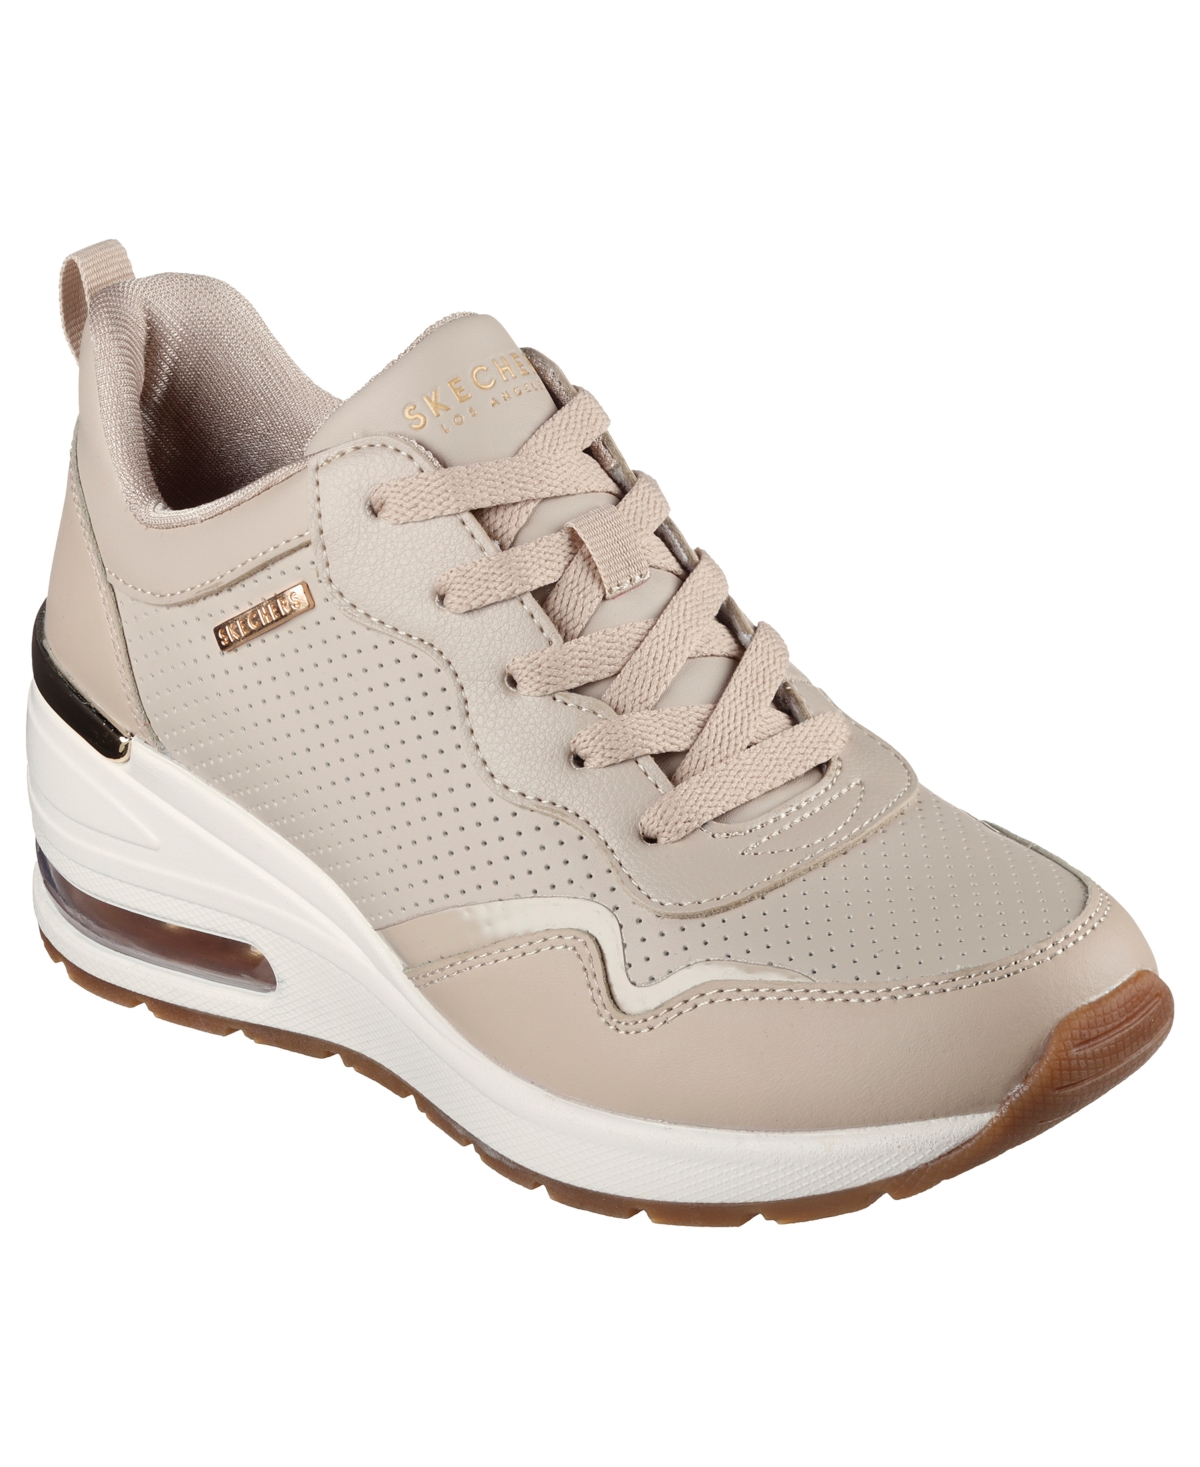 Skechers Women's Street Million Air - Hotter Air Casual Sneakers From ...